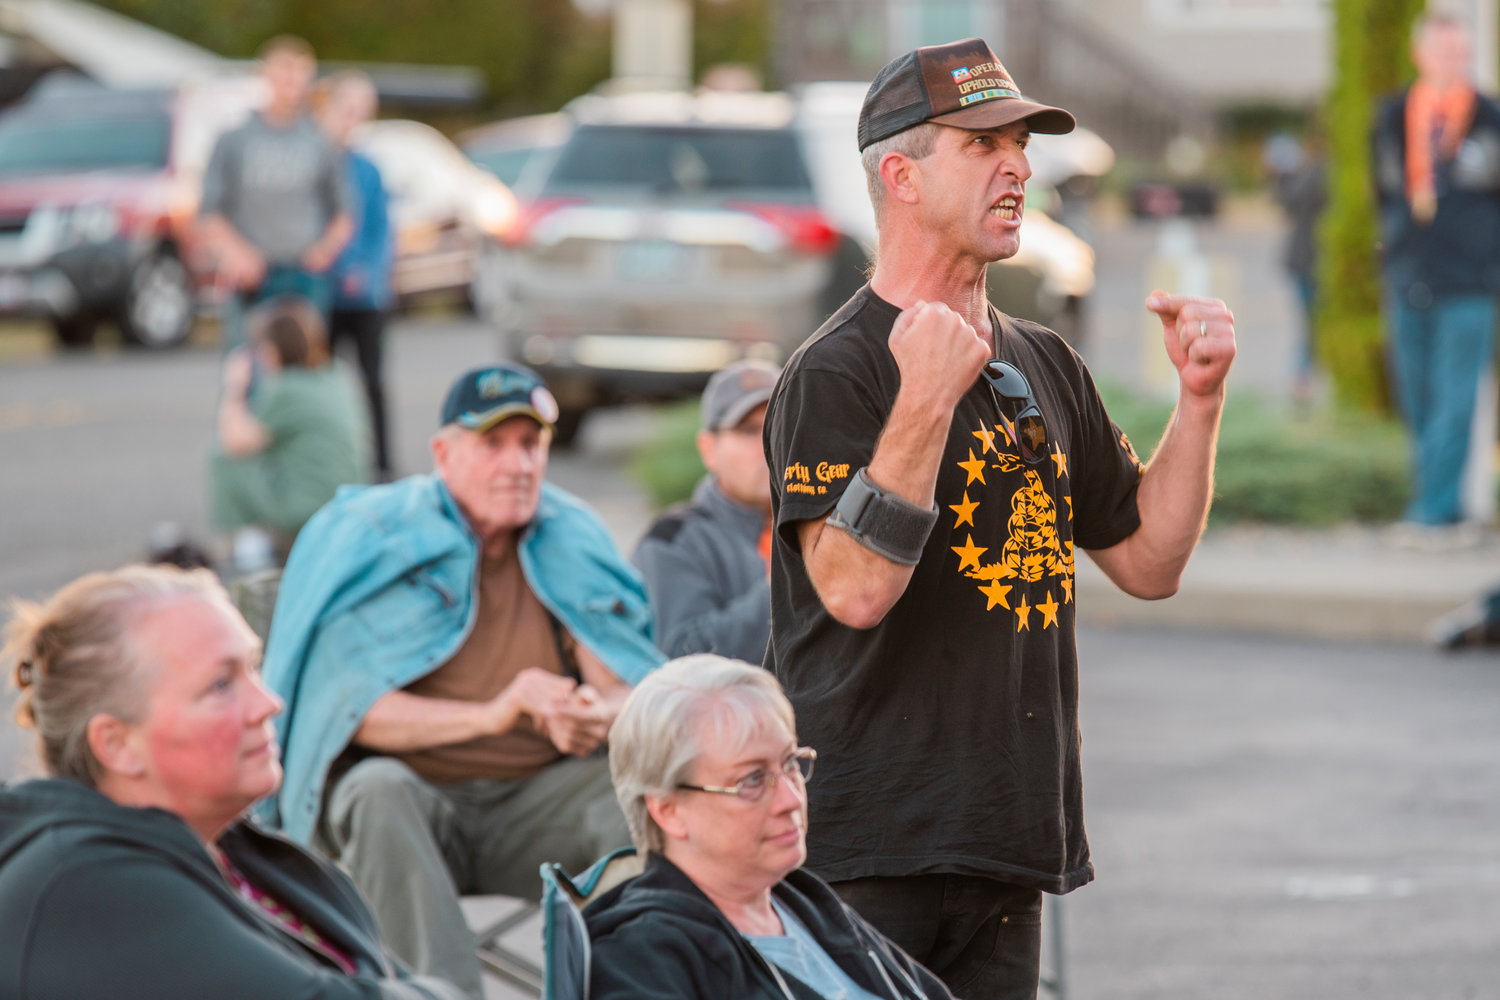 The U.S. Constitution is referenced as community members stand up and demand answers from state representatives during a public town hall meeting Monday evening outside the Veterans Memorial Museum in Chehalis.